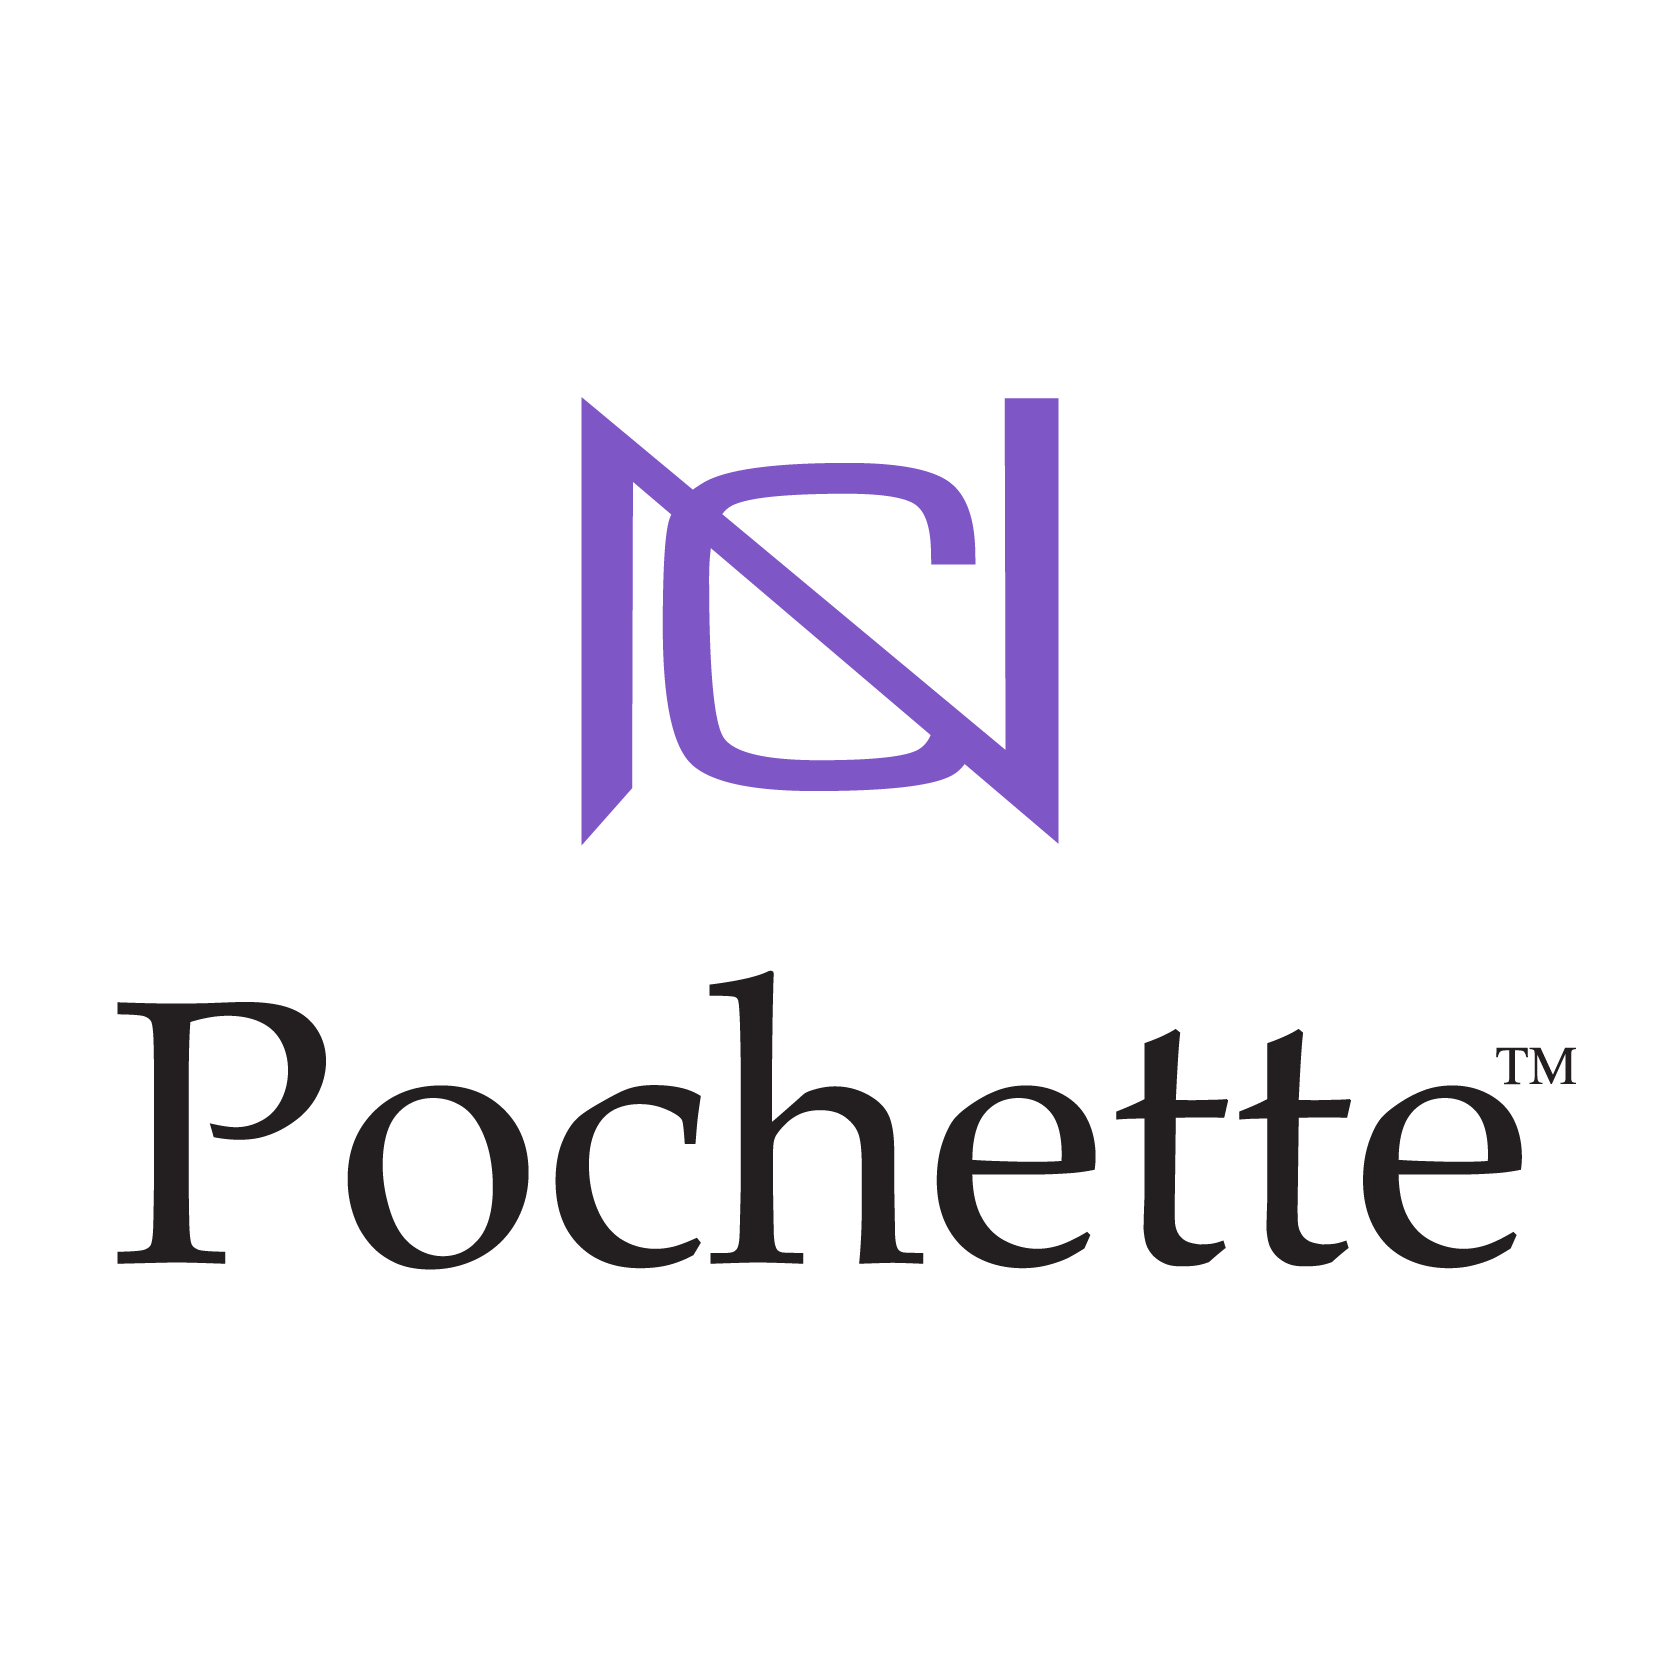 Pochette patented security pockets are unique, sewn-in radio frequency (RF) blocking fabric to store your cell phone and credit cards when on the go.